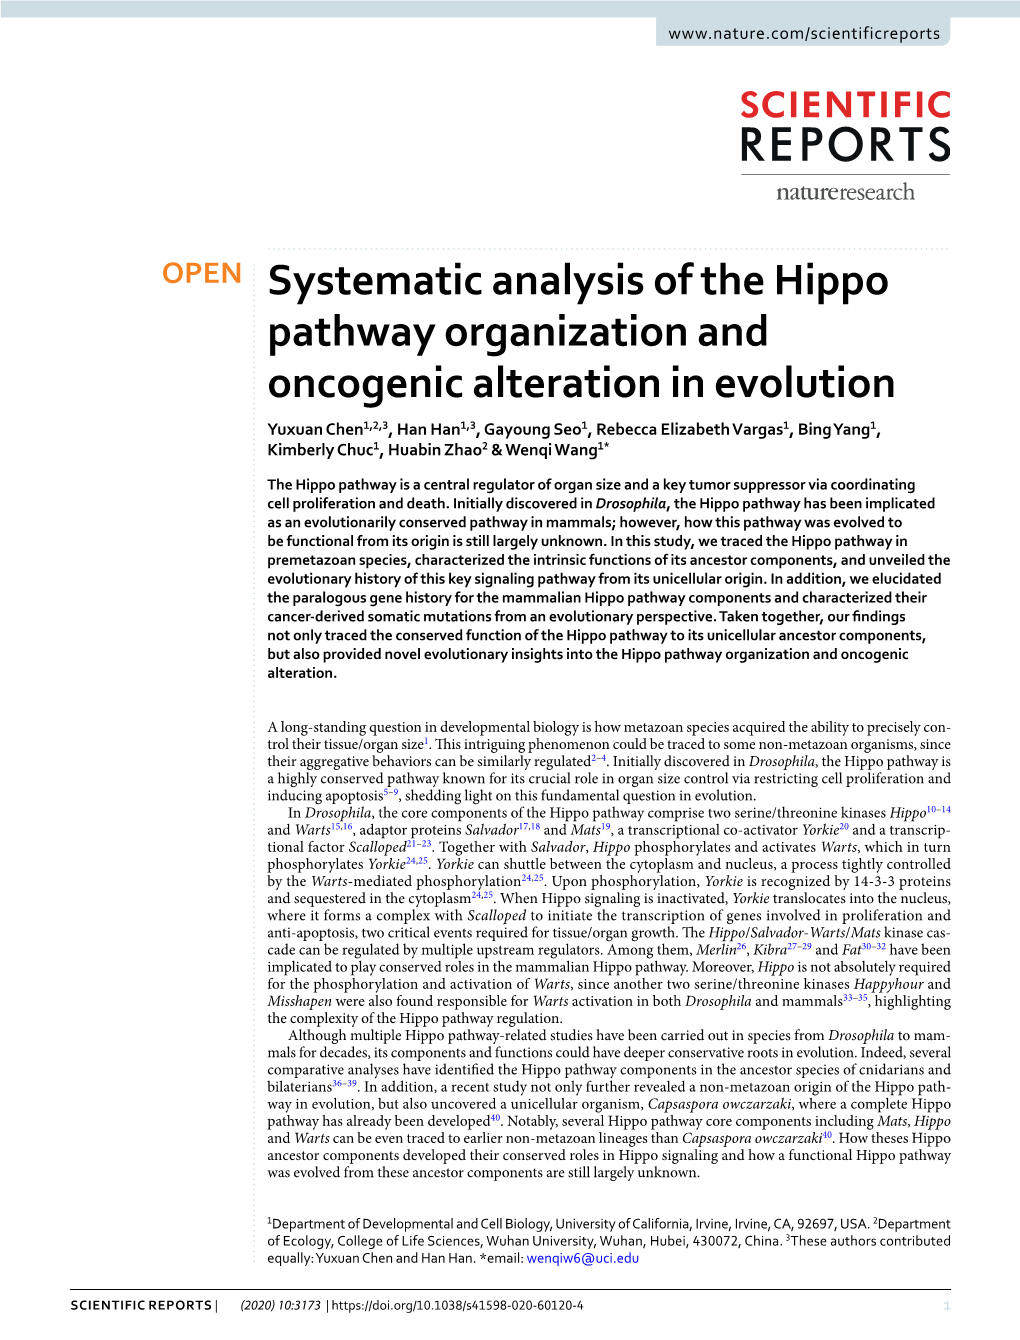 Systematic Analysis of the Hippo Pathway Organization And